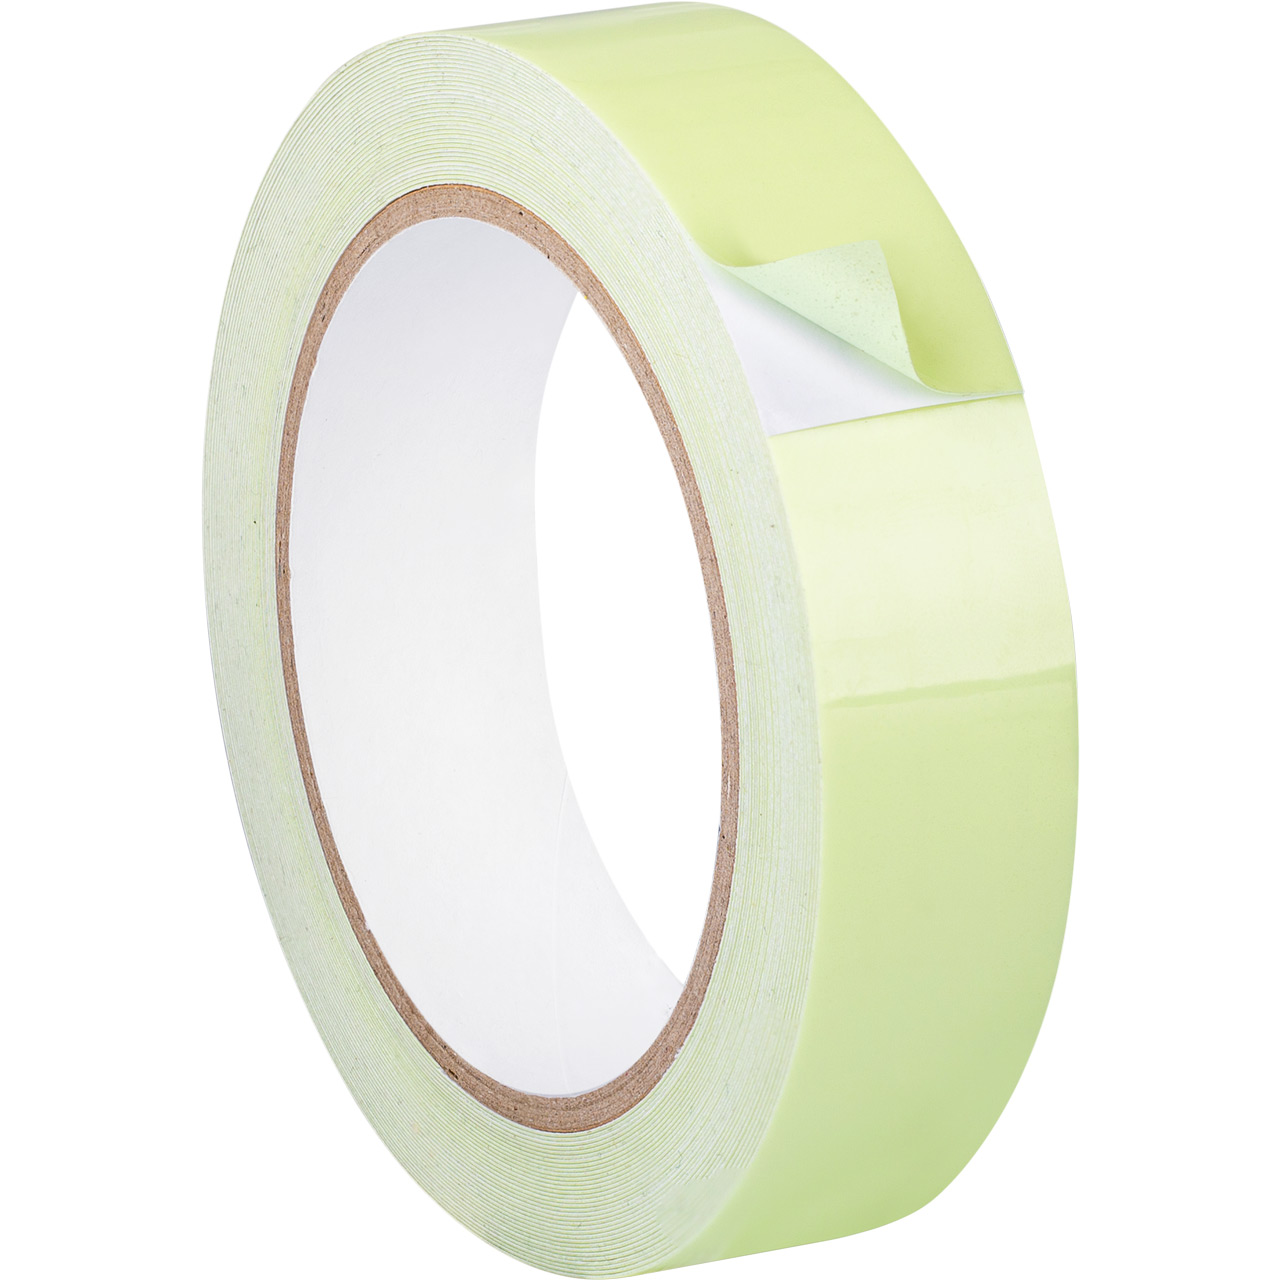 Glow in the dark tape shown off in different widths sold by Easitape